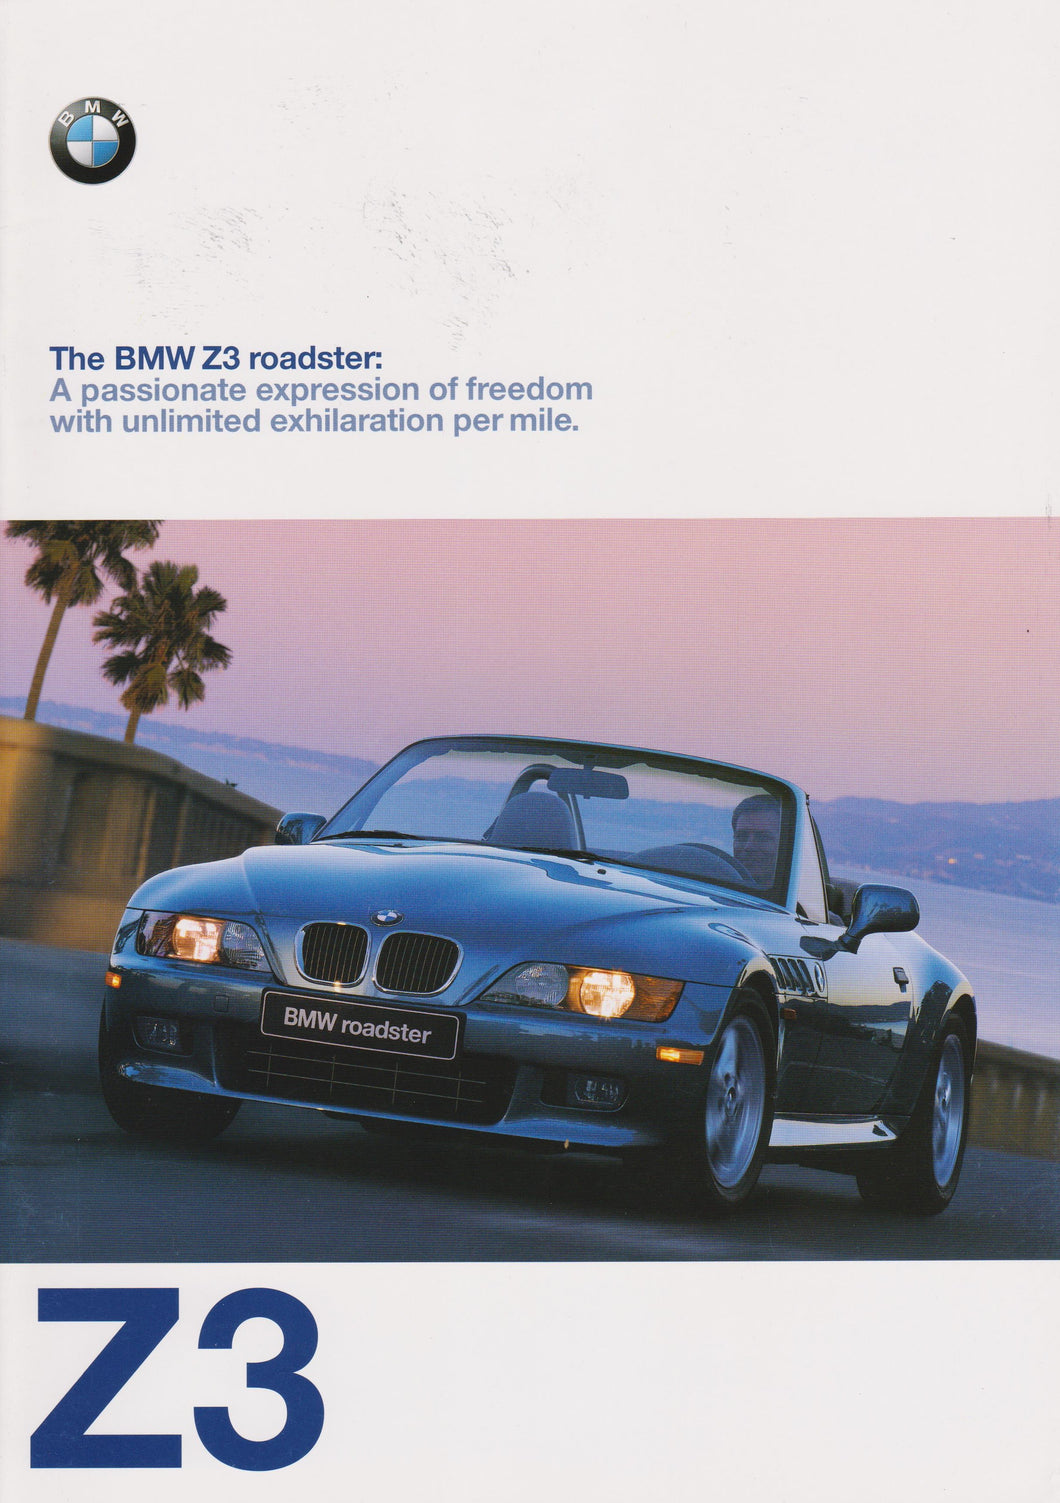 Brochure - The BMW Z3 roadster: Year (1998 E36/7)